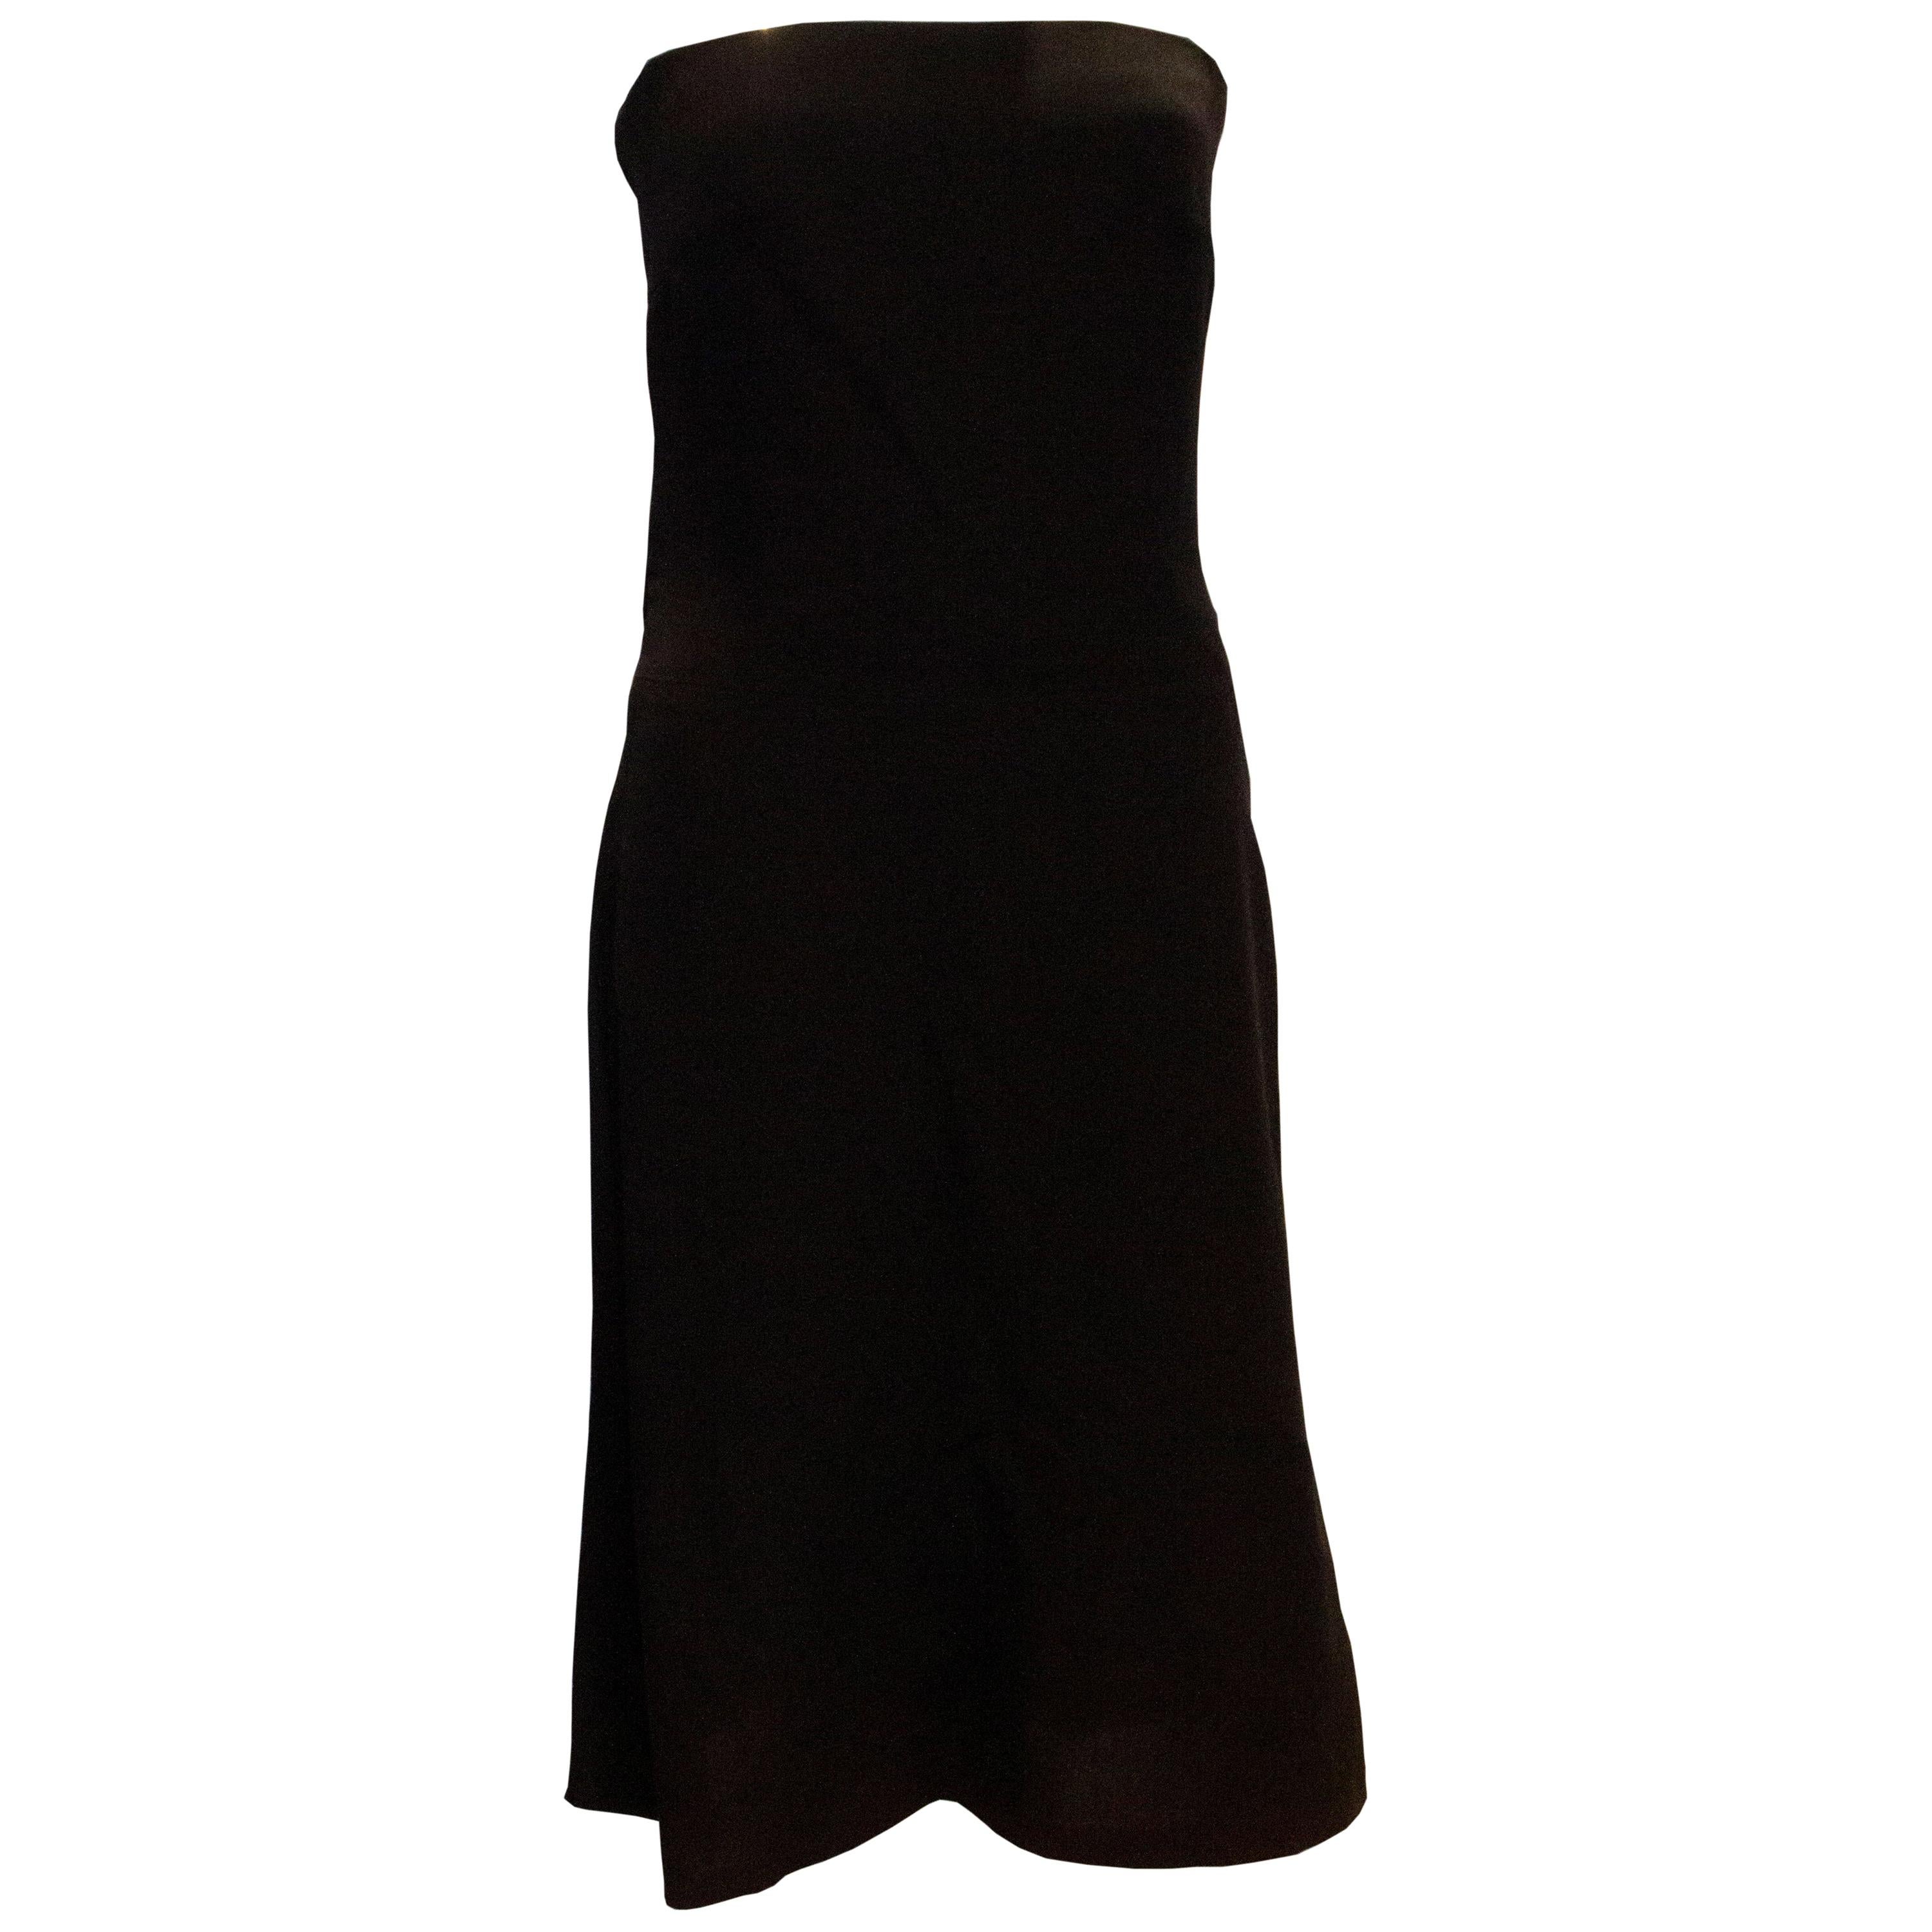 Amanda Wakeley Black Strapless Cocktail Dress For Sale